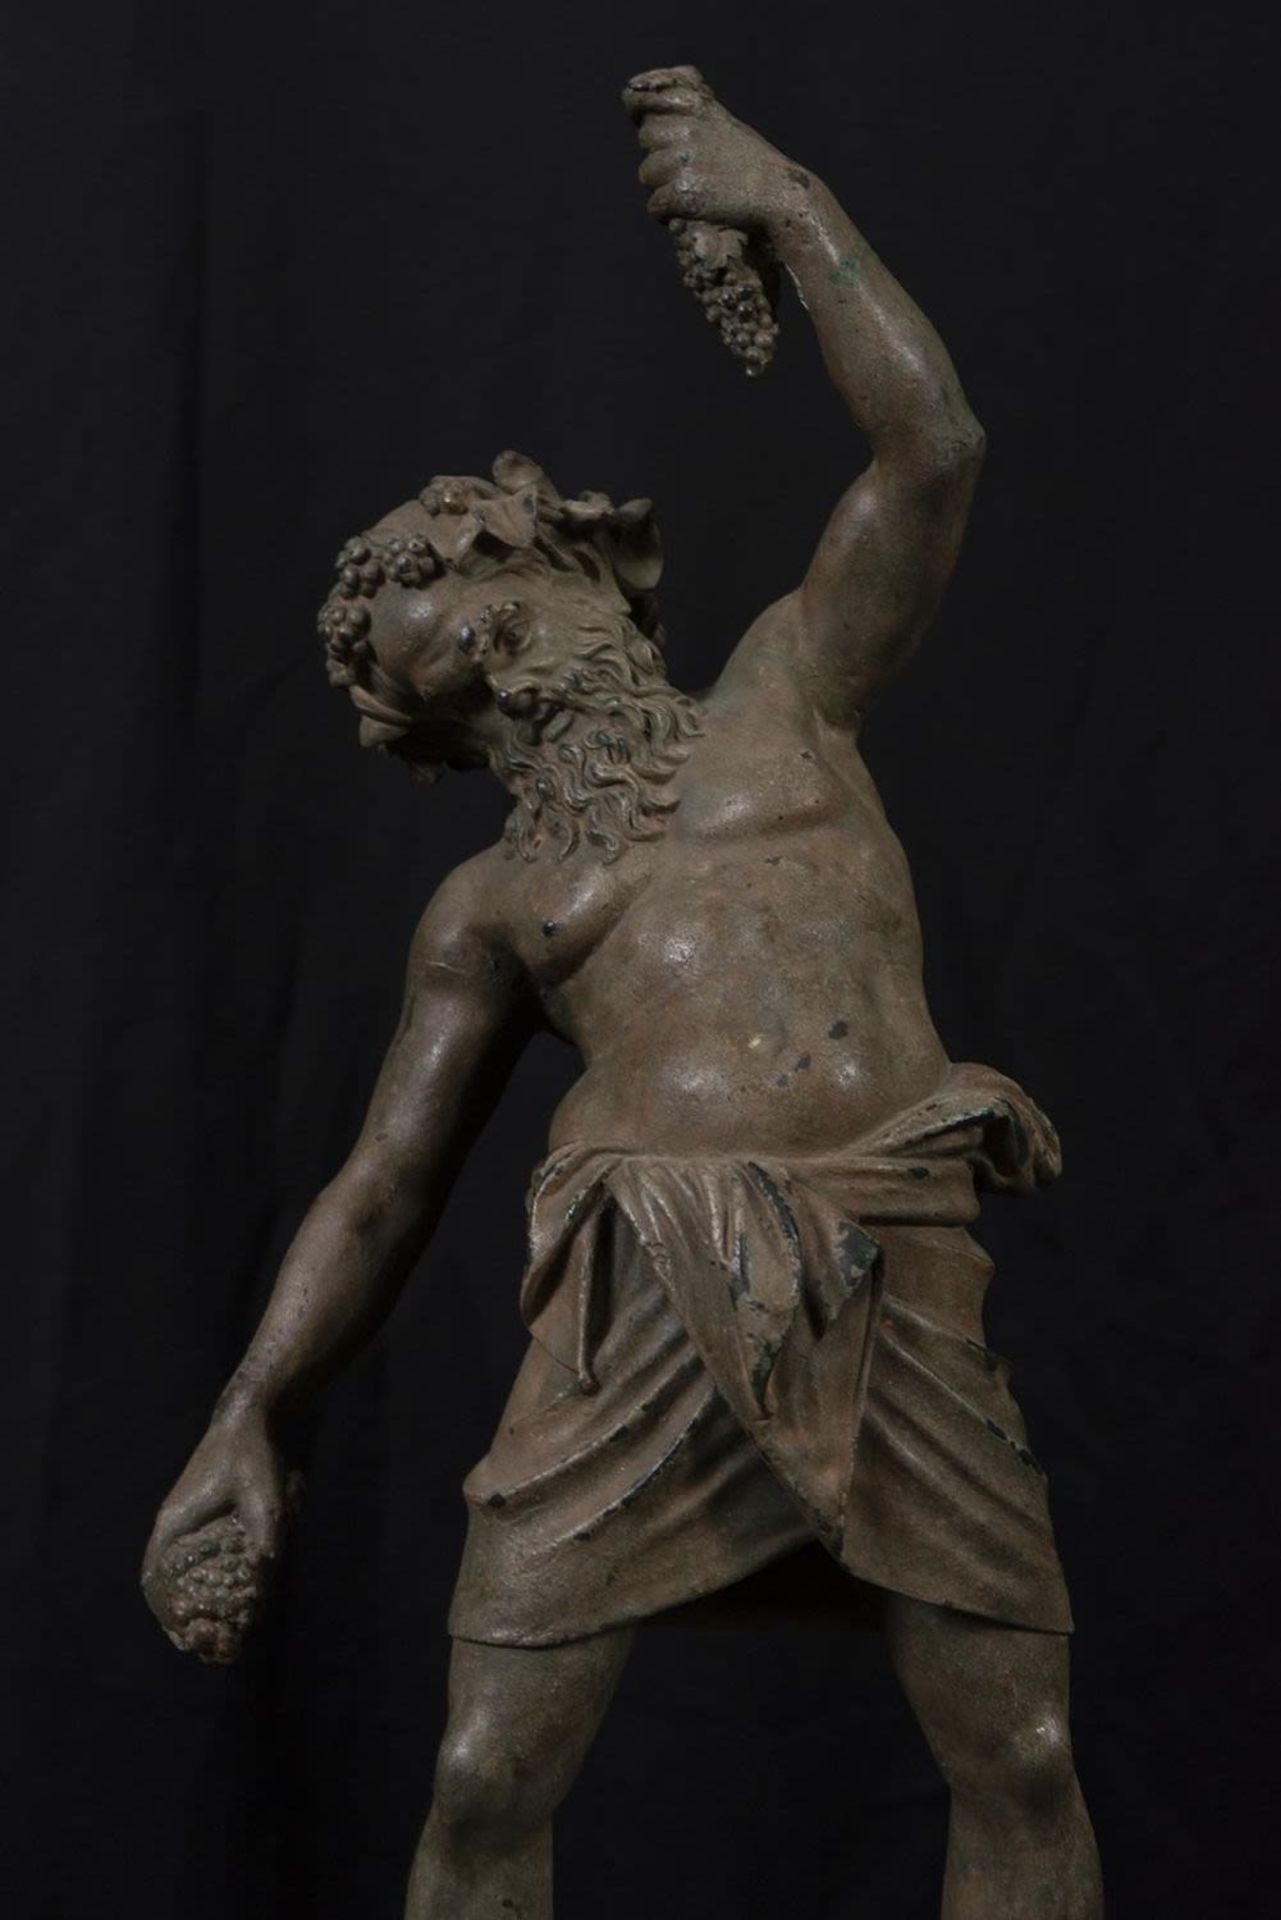 God Bacchus, following models of Classical Rome, Neapolitan foundry from the 19th century - Image 2 of 6